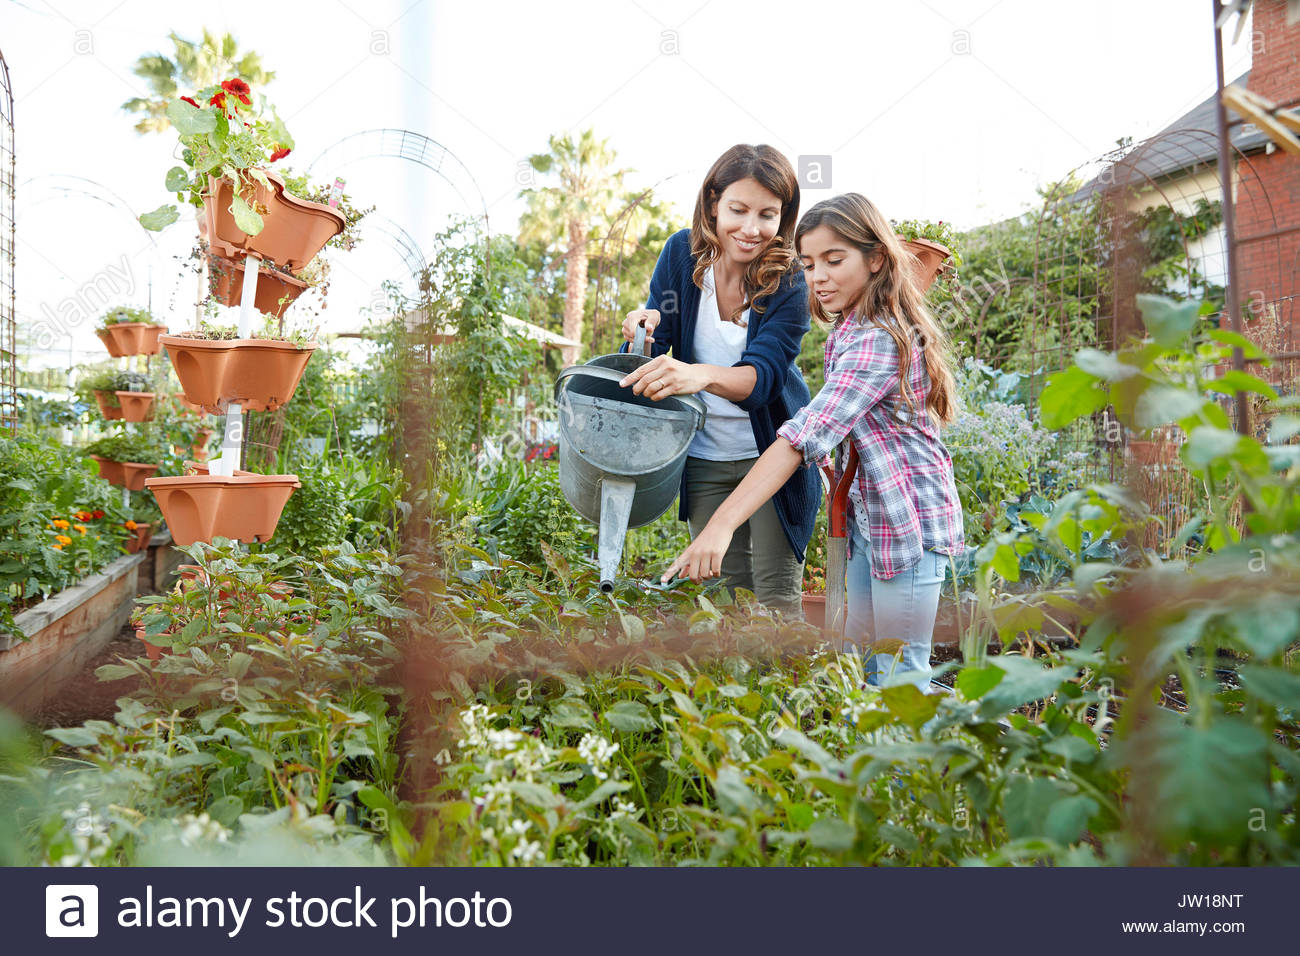 Latina mother and daughter watering plants in vegetable garden Stock Photo